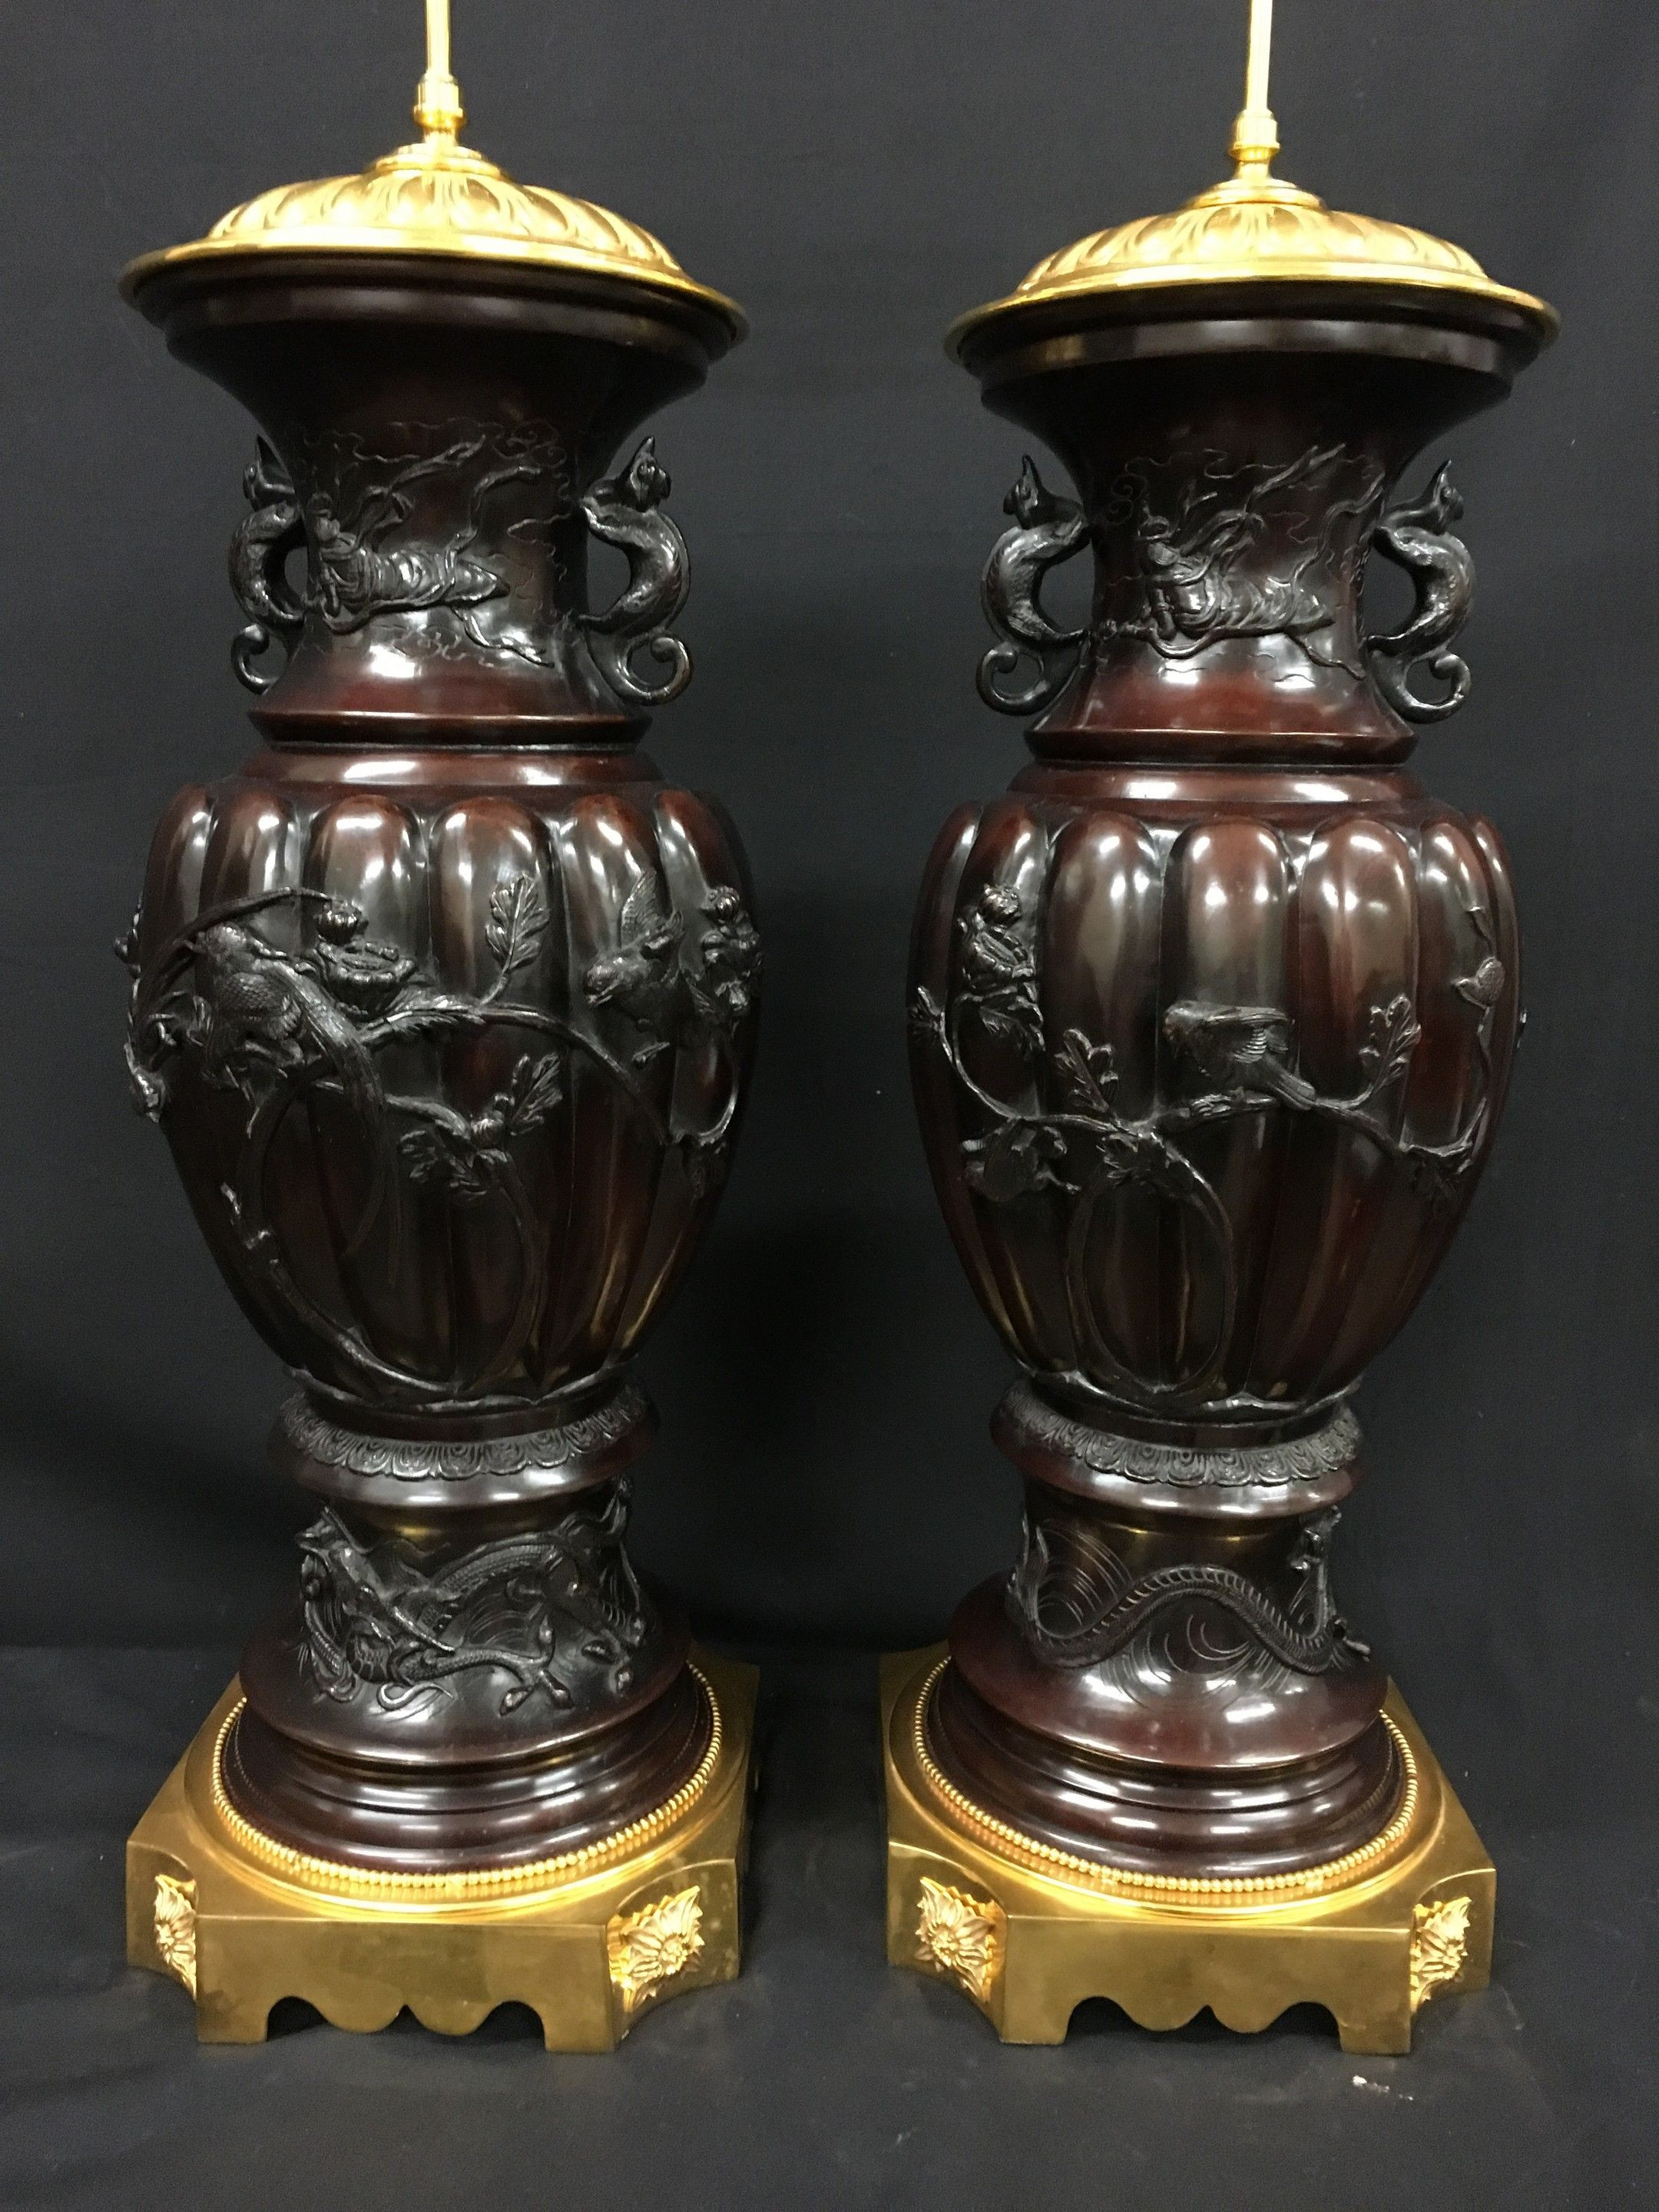 29 Lovely Hand Painted Japanese Vase 2024 free download hand painted japanese vase of antique japanese vases the uks premier antiques portal online throughout pair large japanese bronze vases lamps